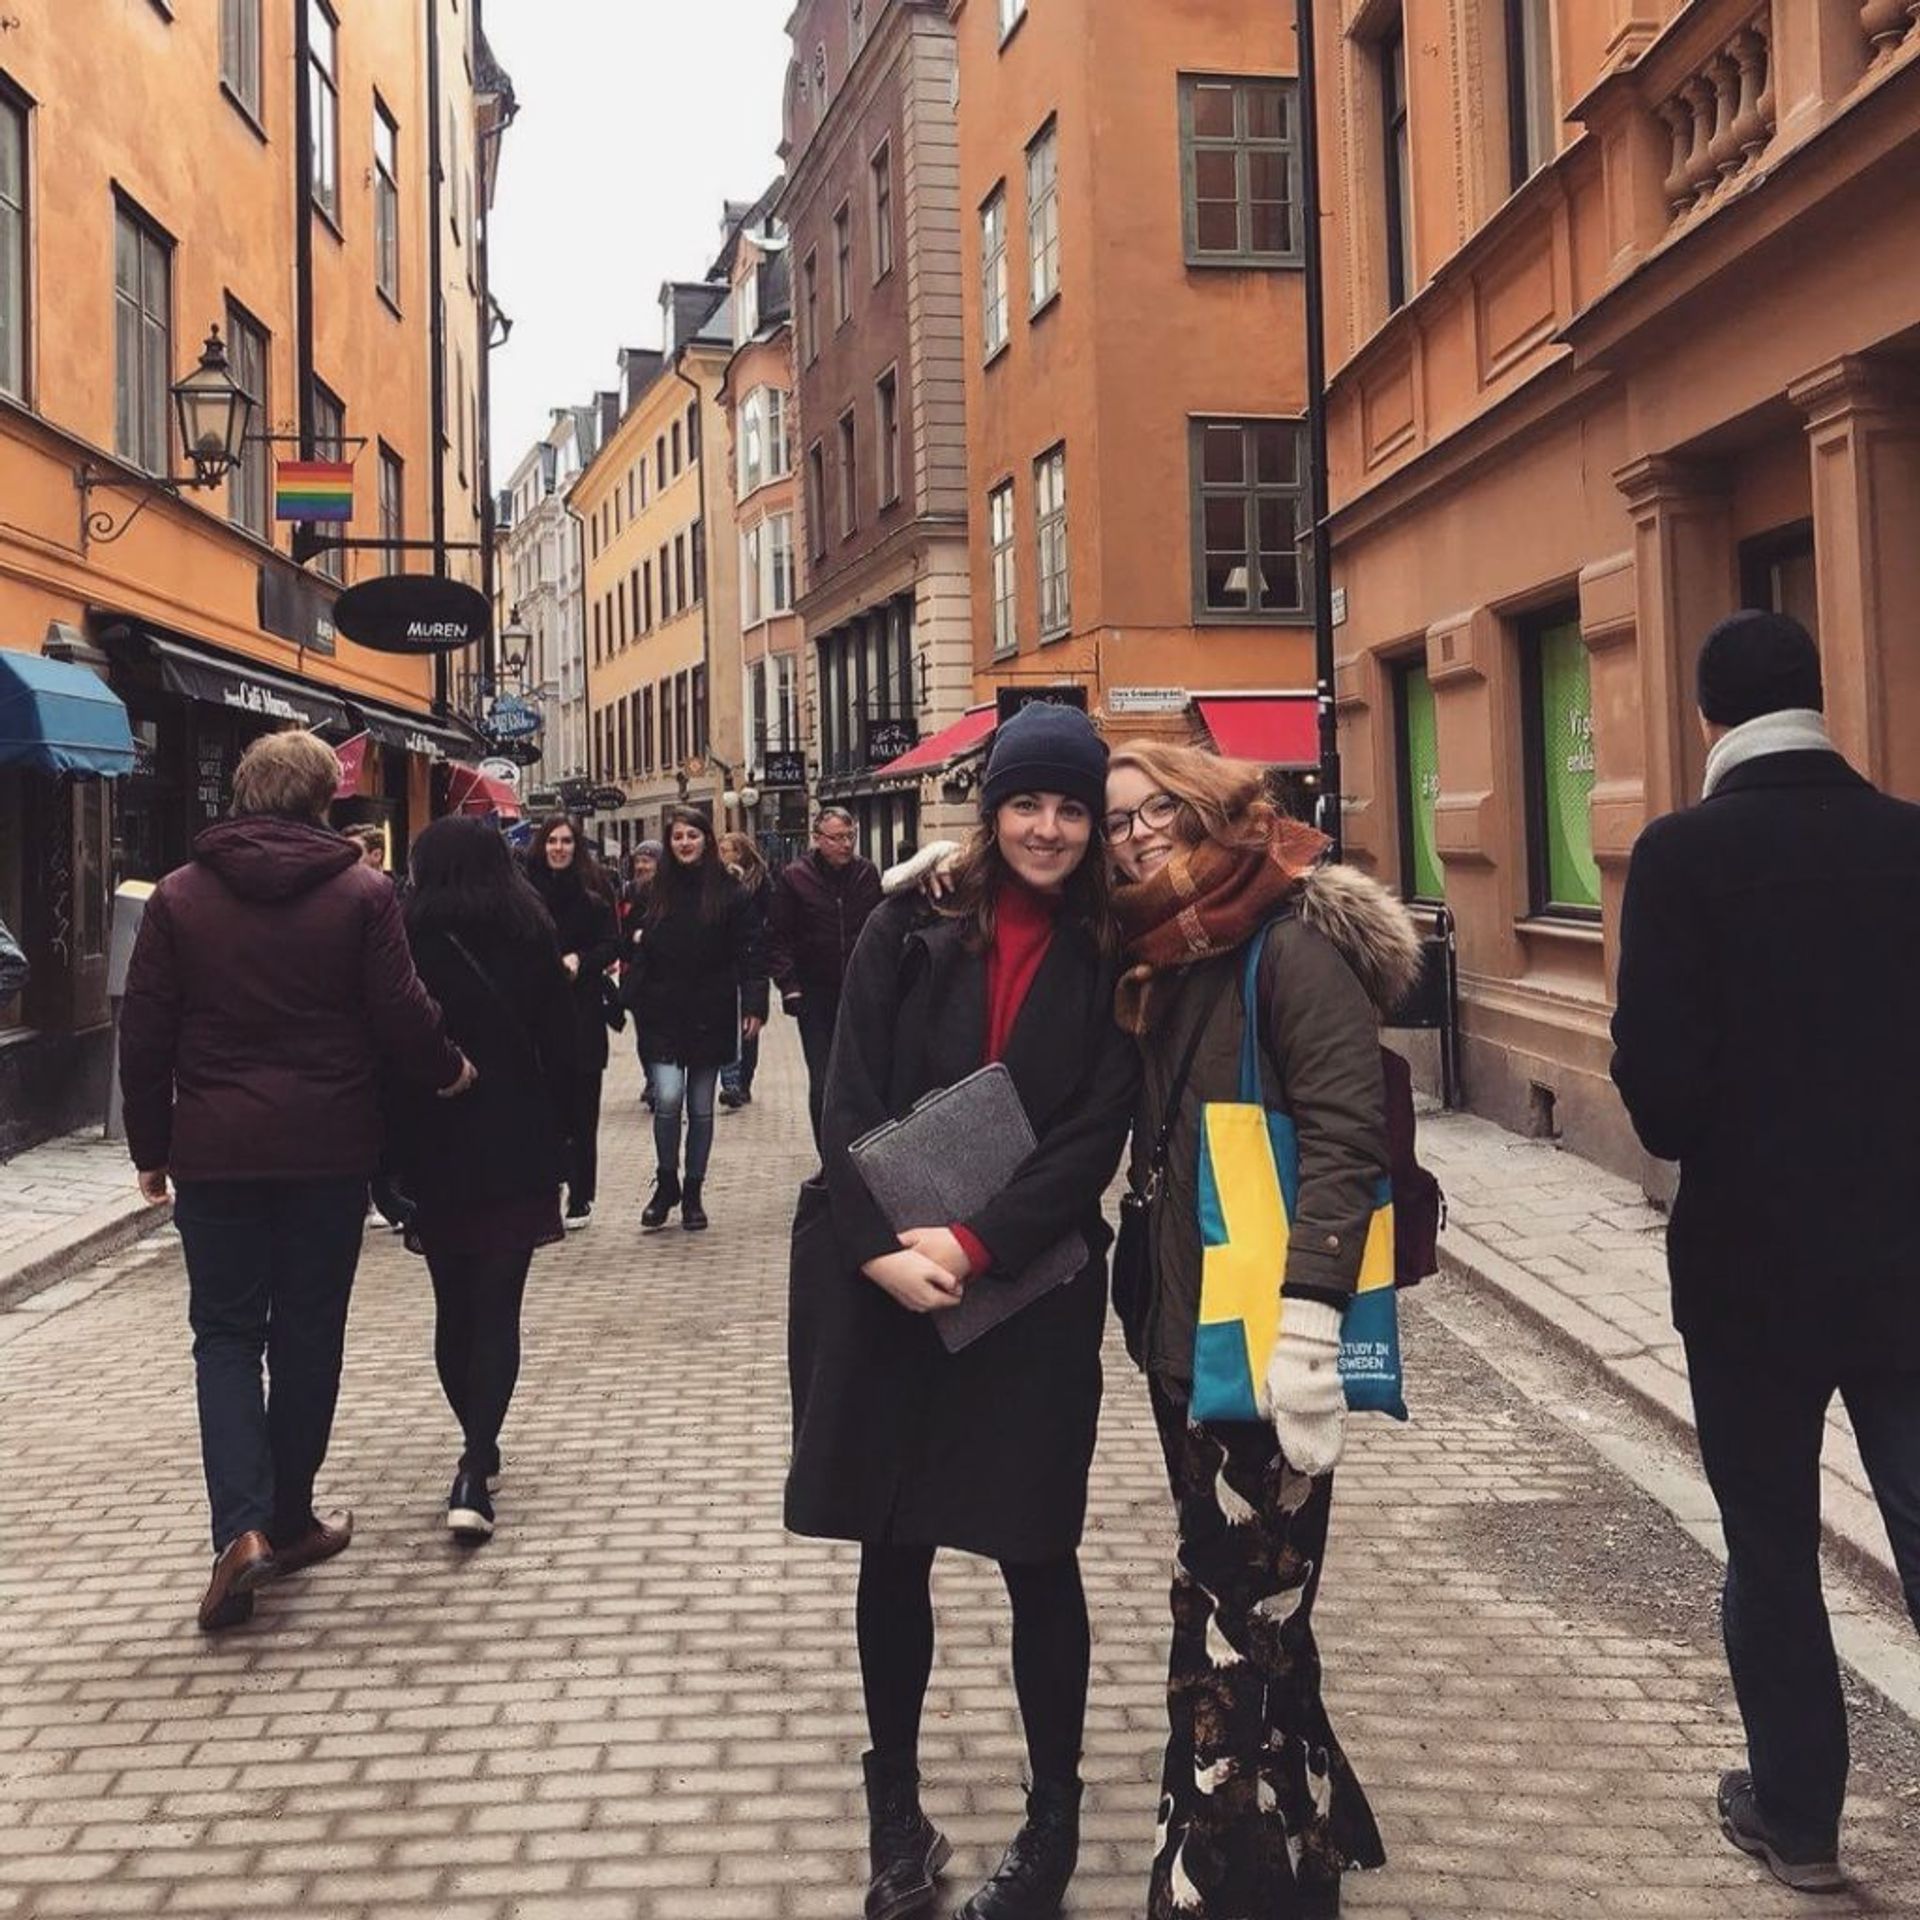 The author (me!) and a pal in Gamla Stan, Stockholm, March 2018